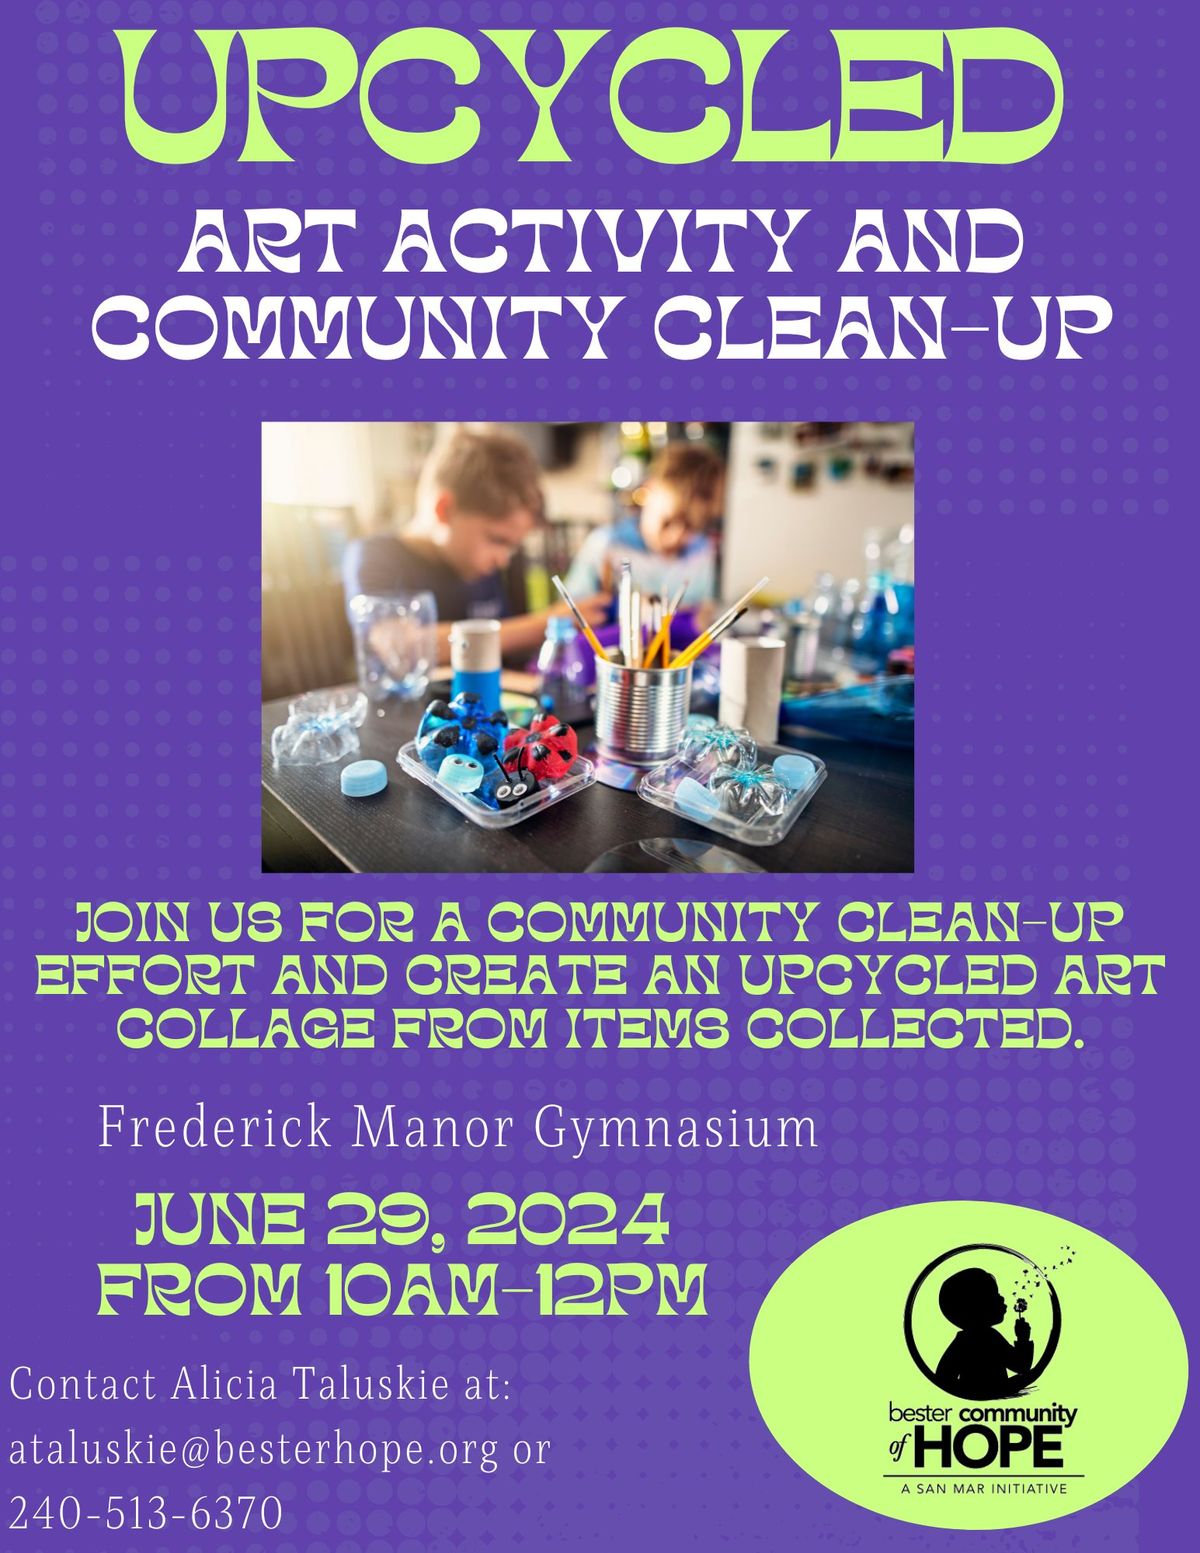 Better Together: Upcycled Art and Community Clean Up